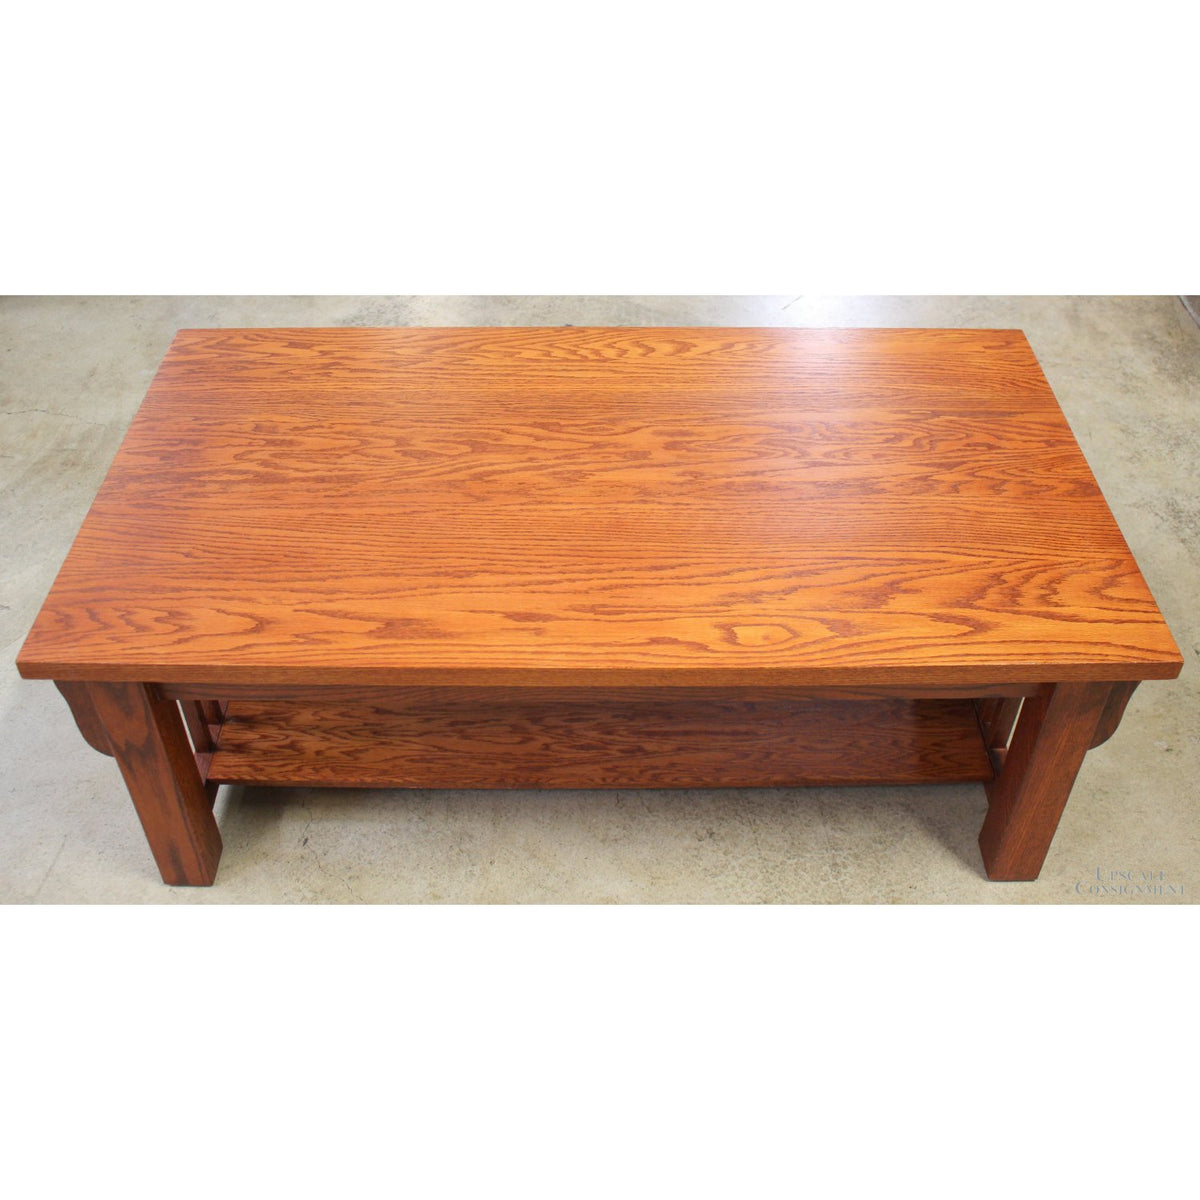 Mission Style Oak Coffee Table